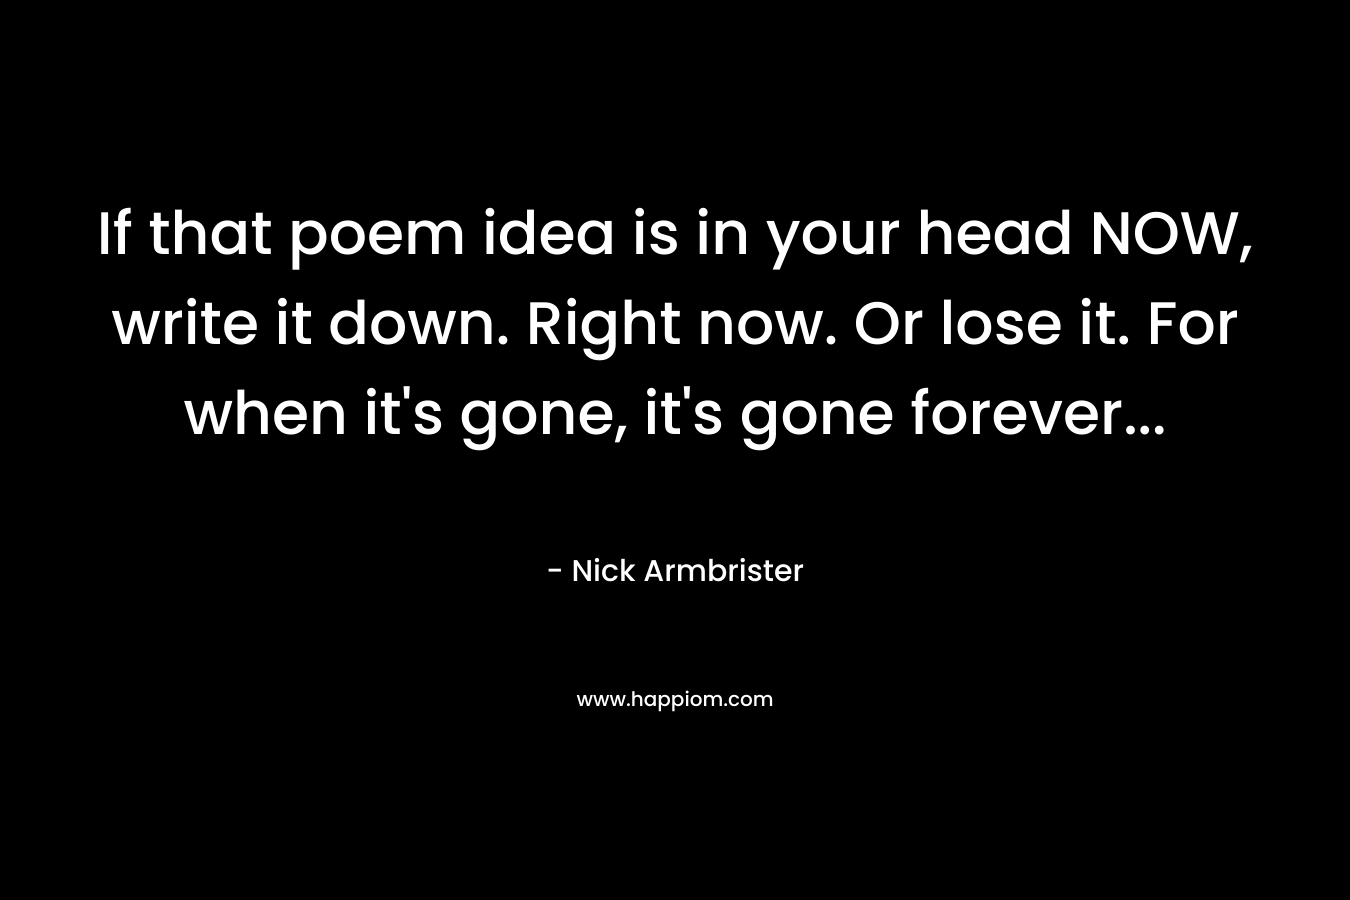 If that poem idea is in your head NOW, write it down. Right now. Or lose it. For when it's gone, it's gone forever...